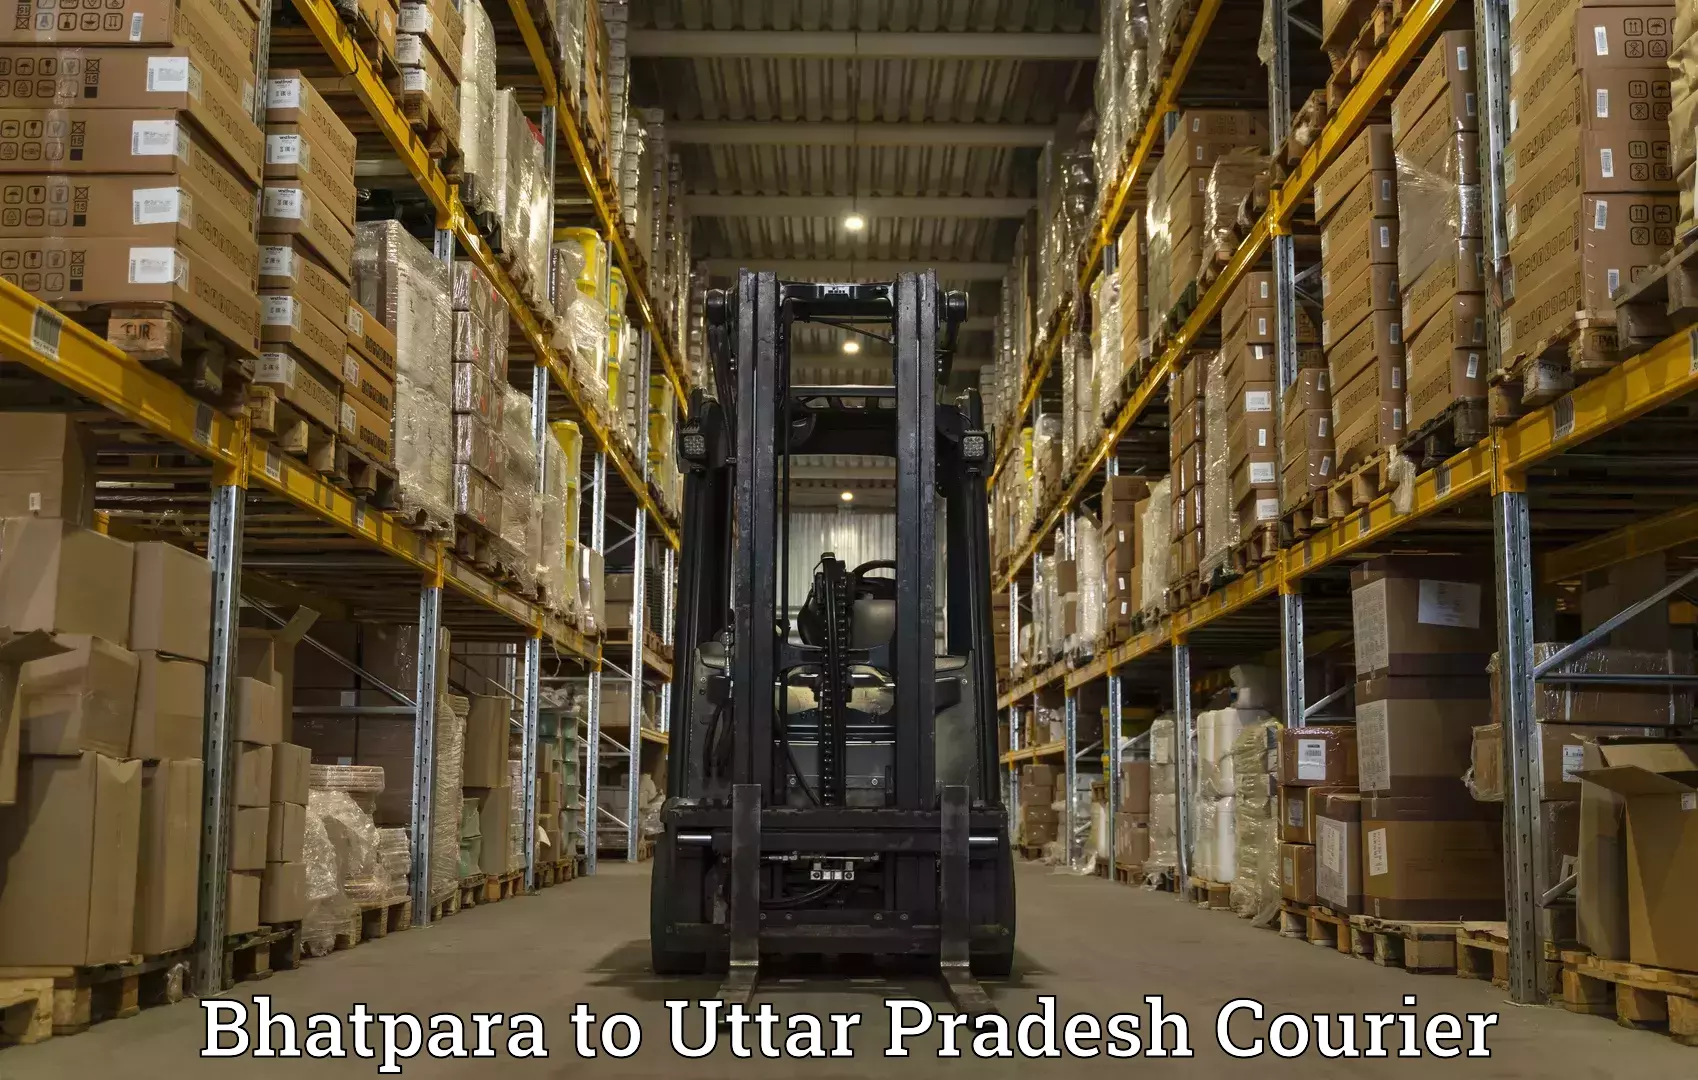 Multi-carrier shipping Bhatpara to Allahabad